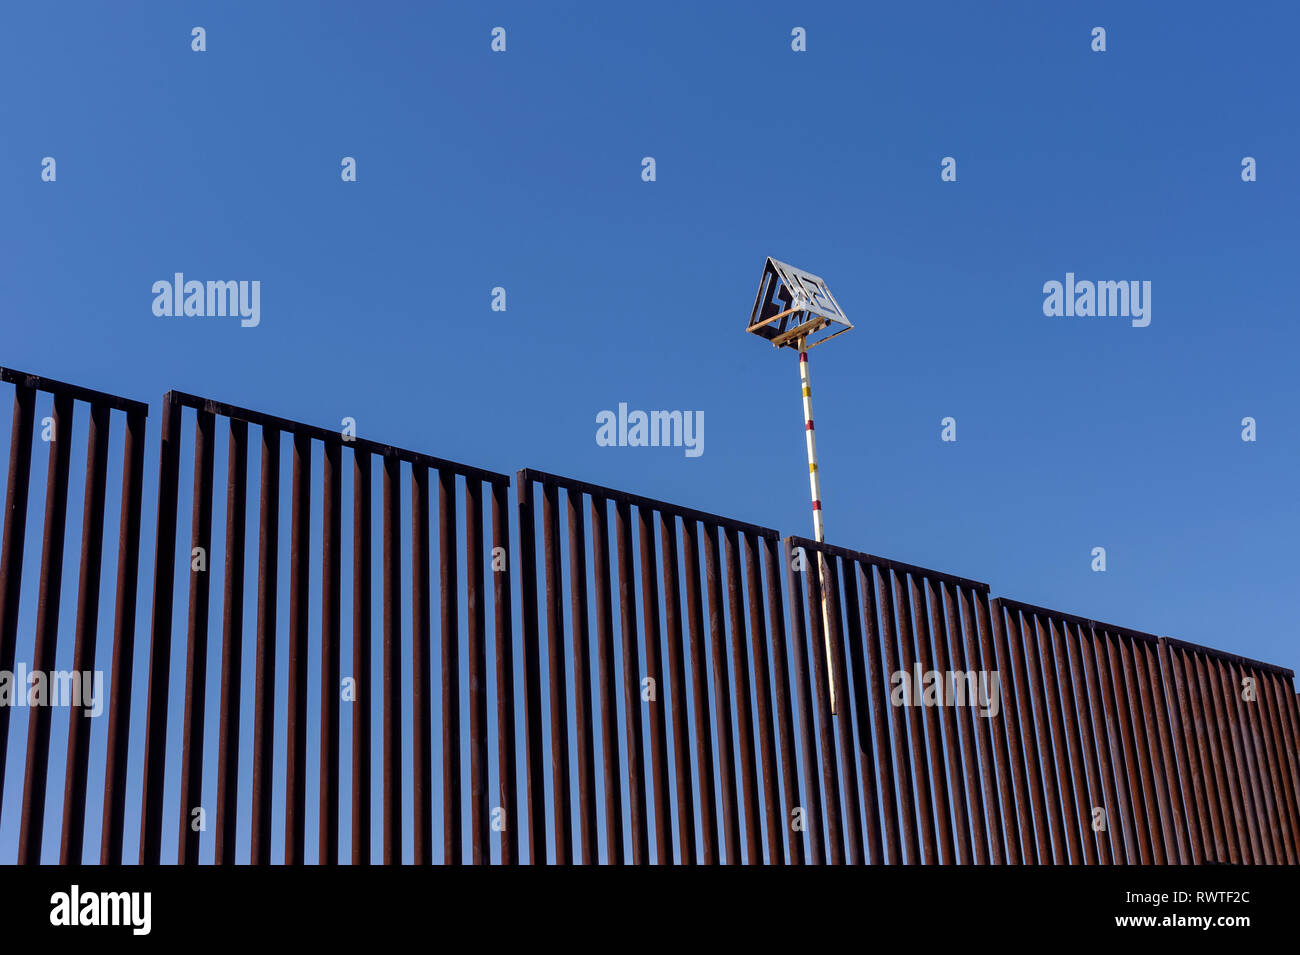 Detail view of early bollard fence made of round steel tubing, note location marker attached to top of fence, about 3 miles west of Nogales Arizona. Stock Photo